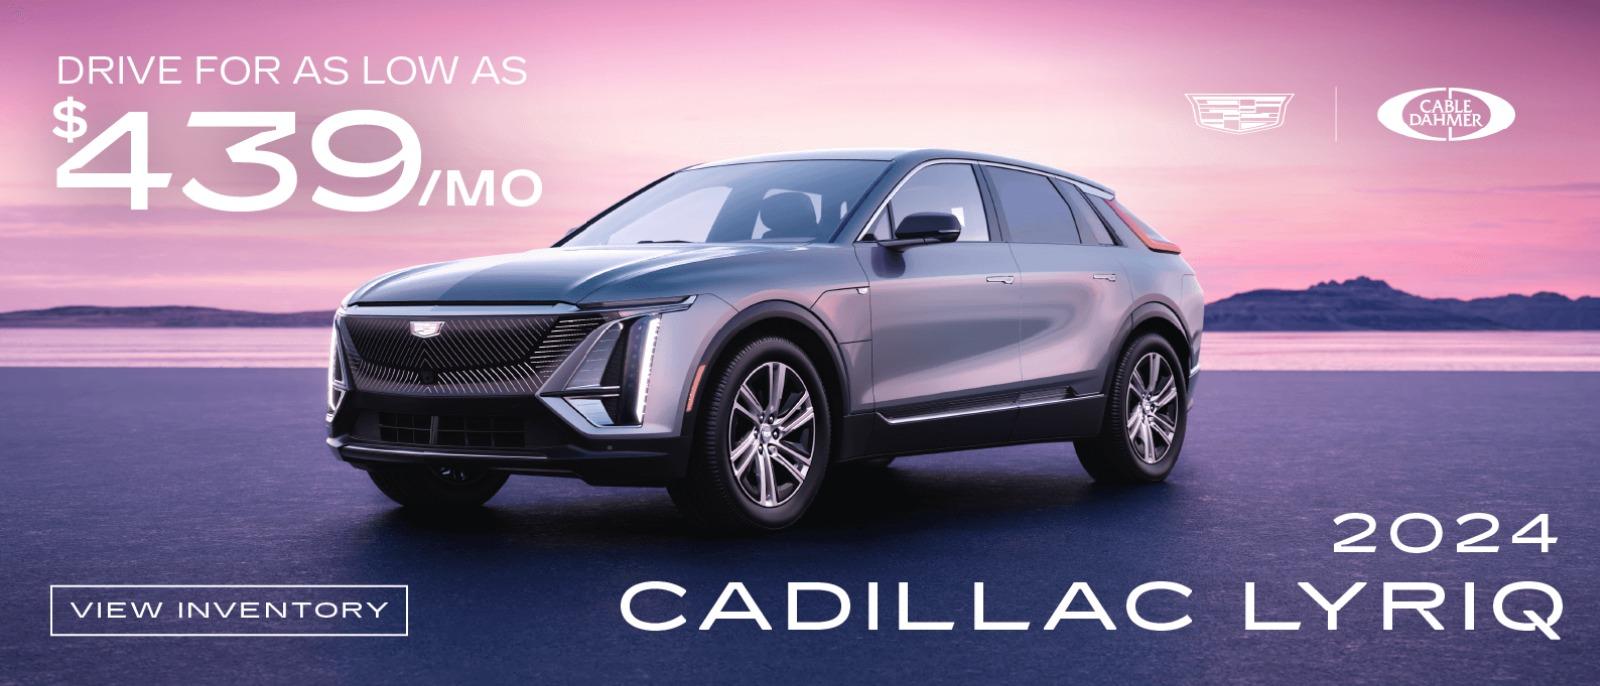 2024 Cadillac LYRIQ drive for as low as $439 a month